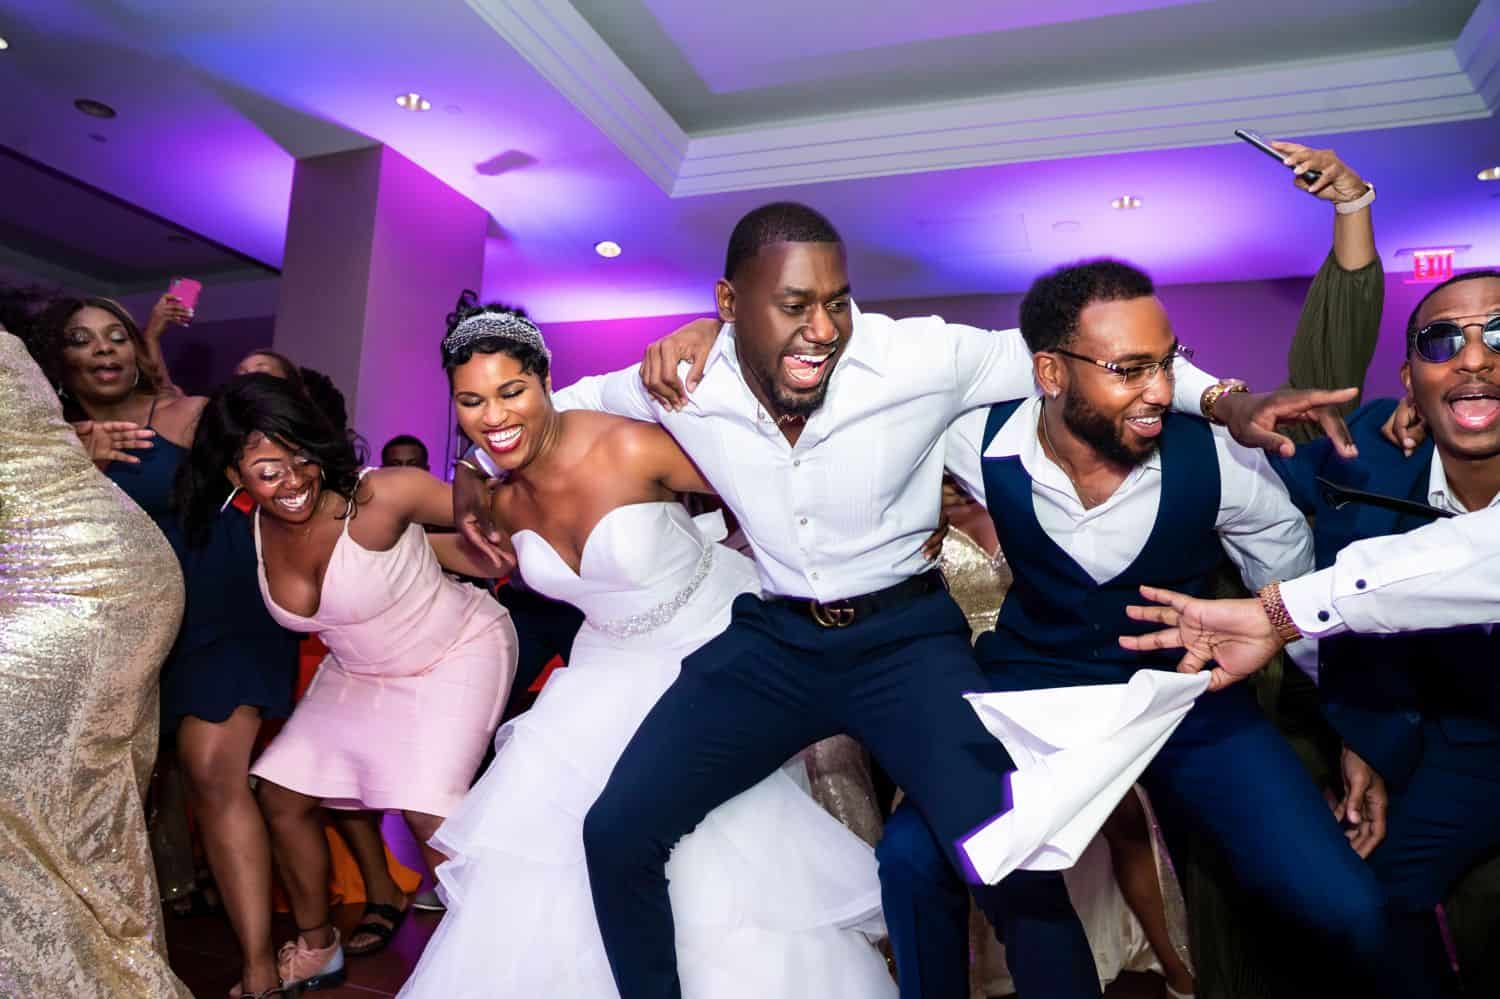 A bride and groom dance happily in a circle with their friends.